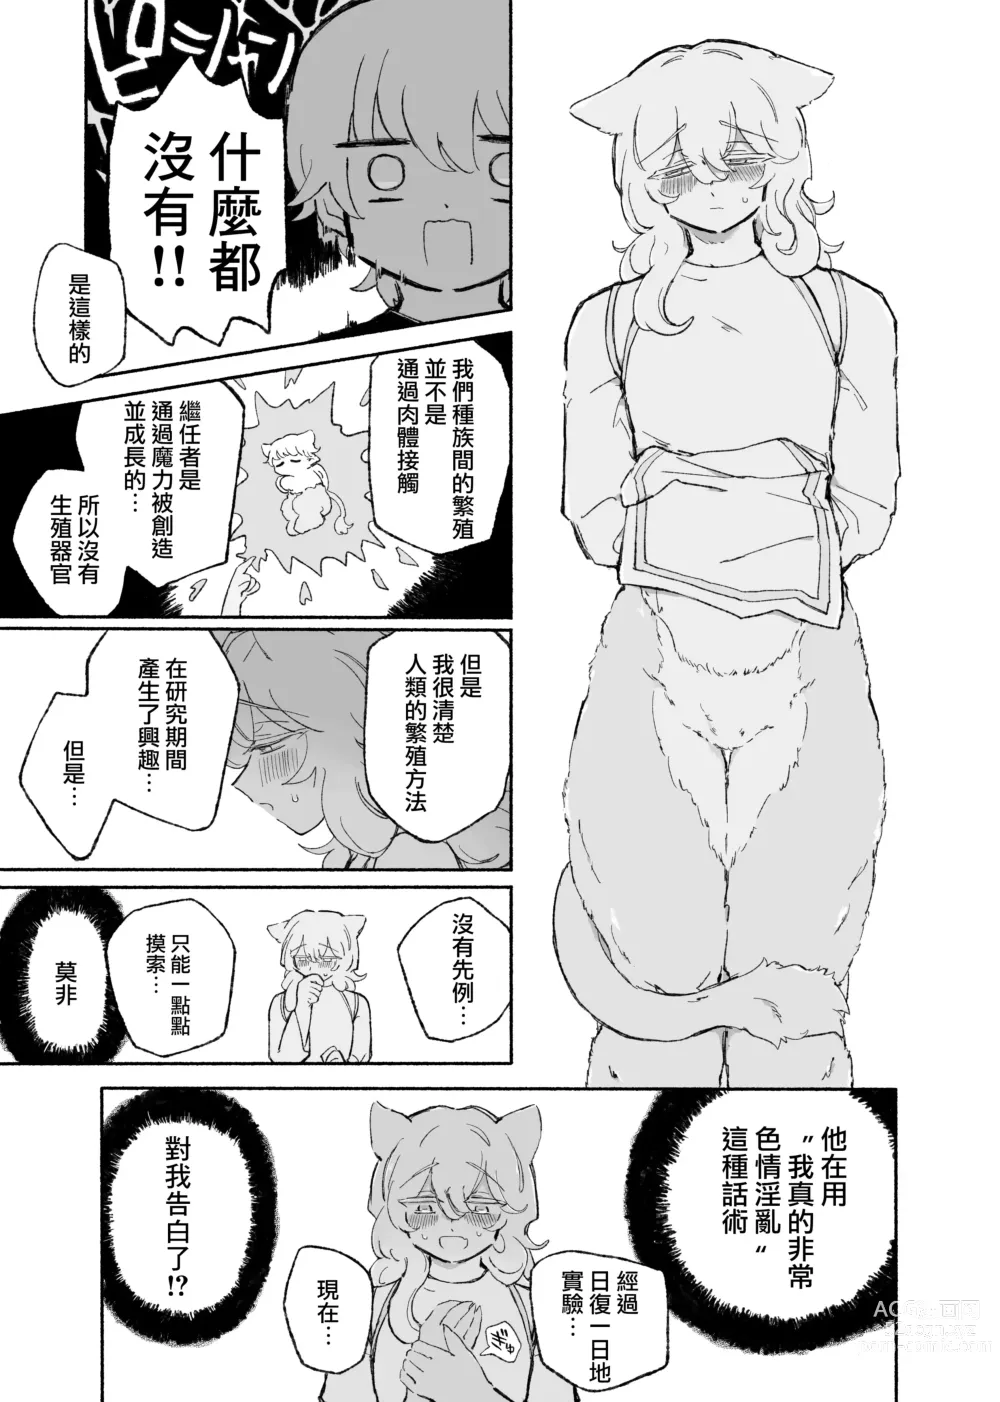 Page 17 of doujinshi 零之惡魔